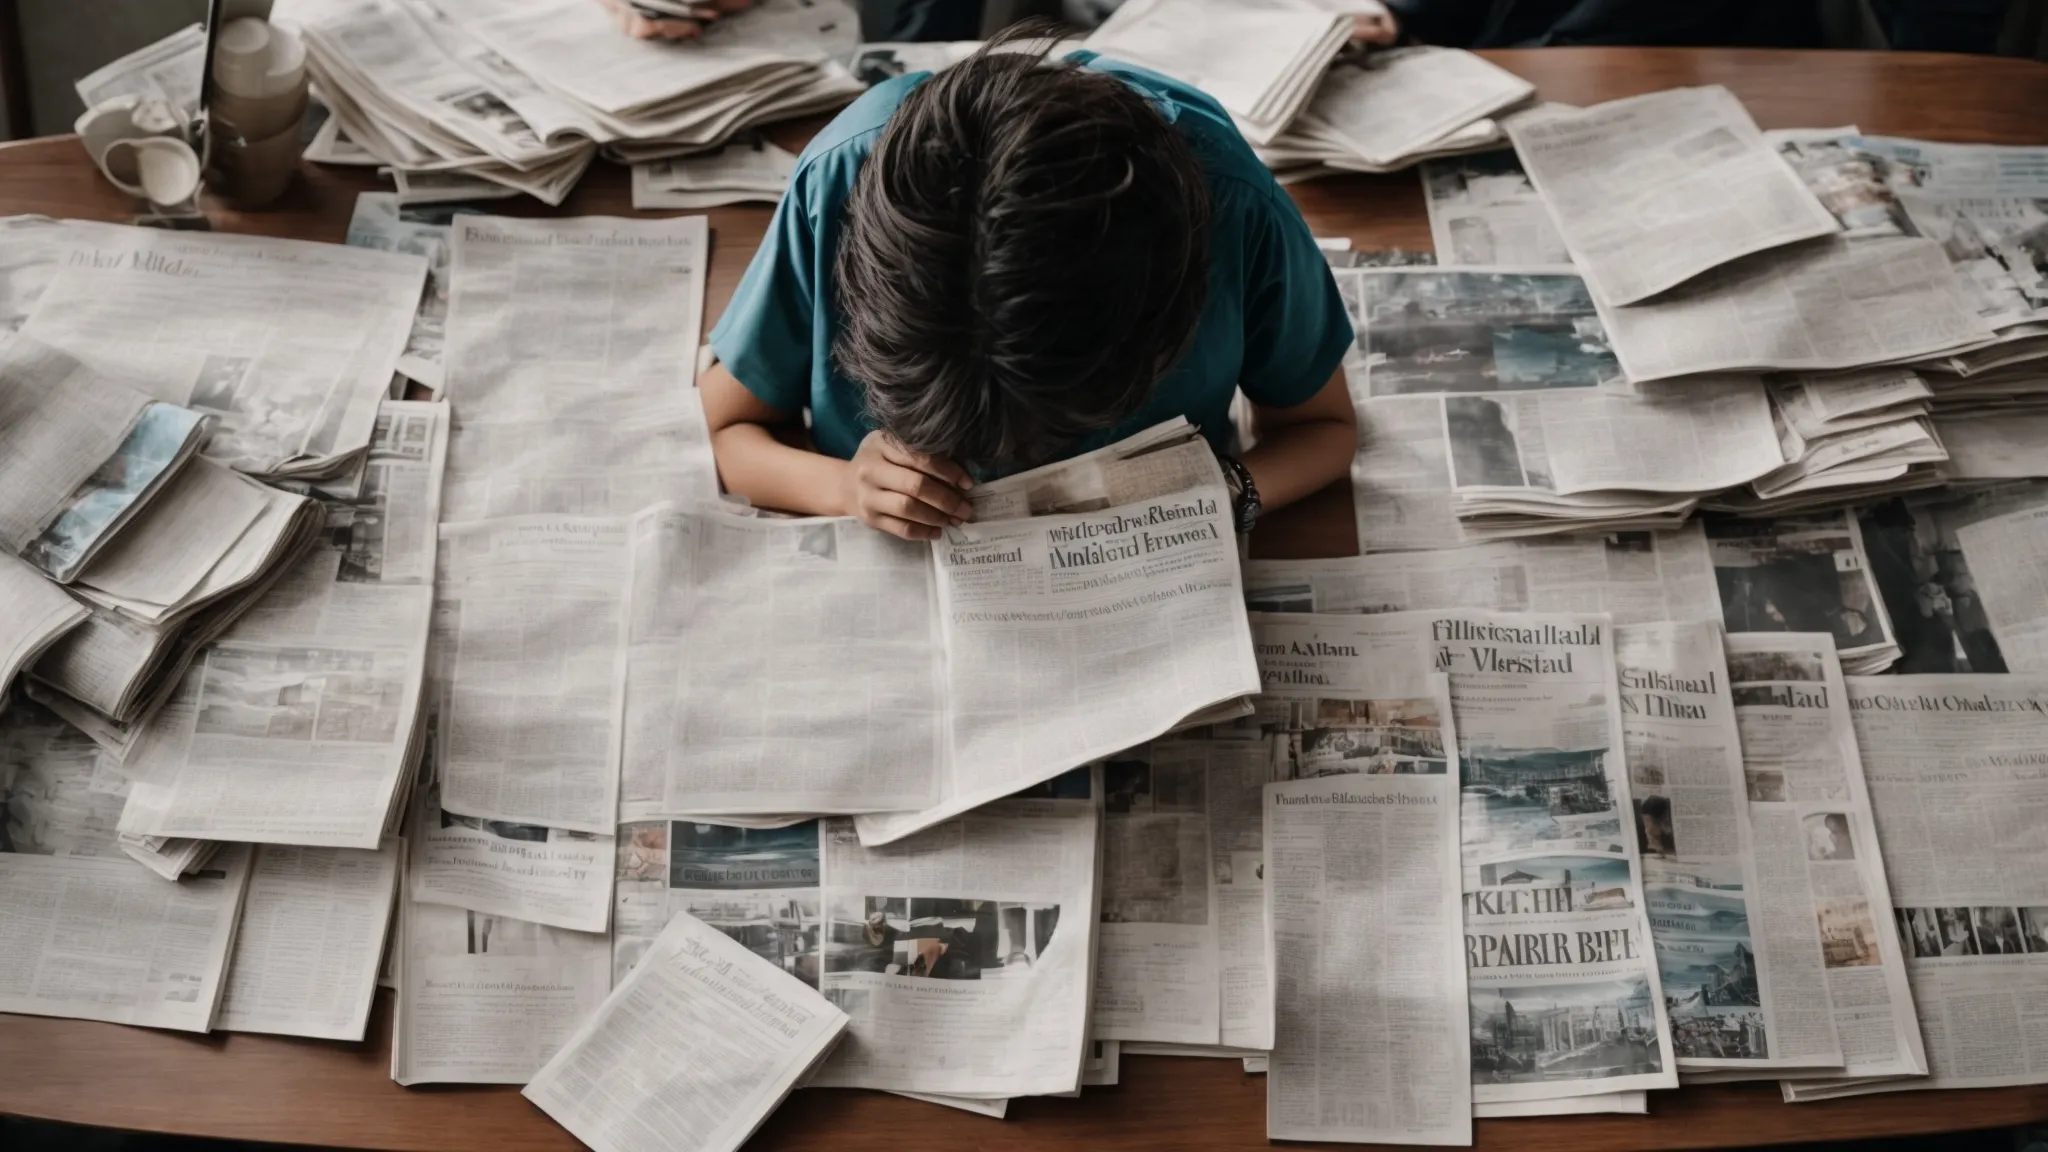 a person sitting at a desk with multiple newspapers spread out, deeply focused on reading.